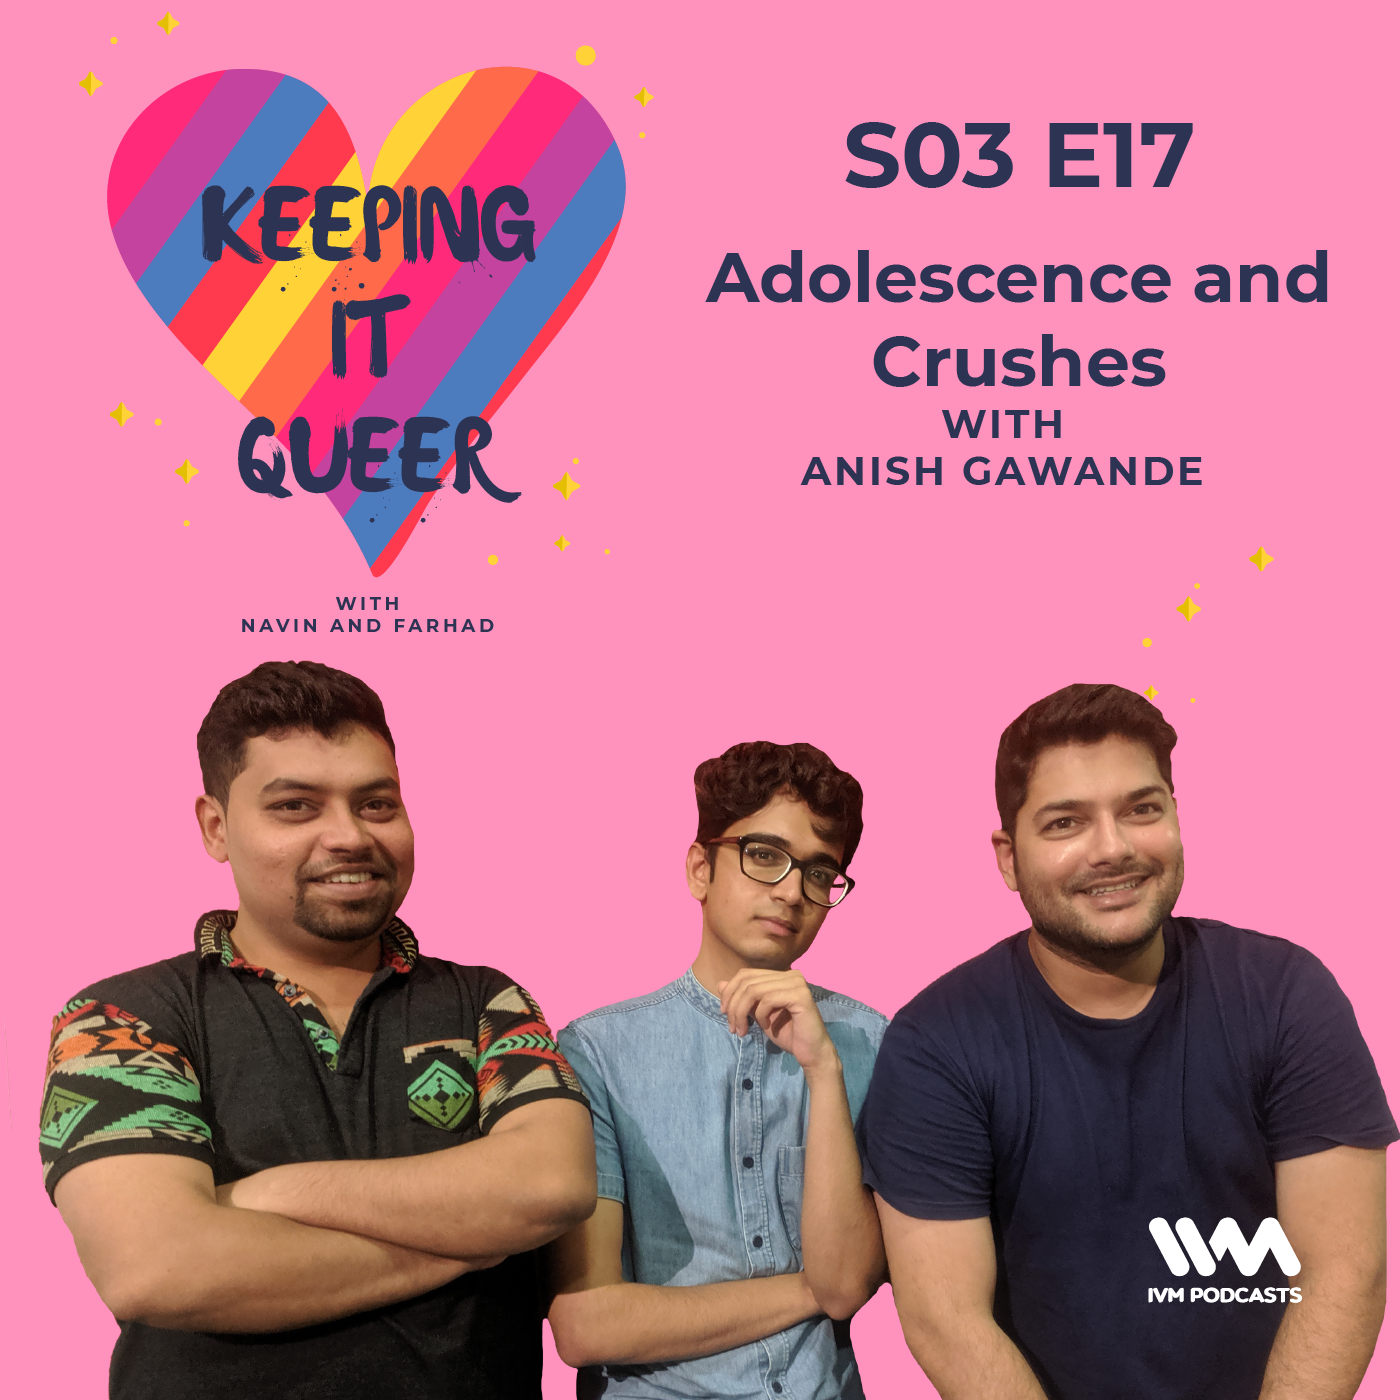 S03 E17: Adolescence and Crushes